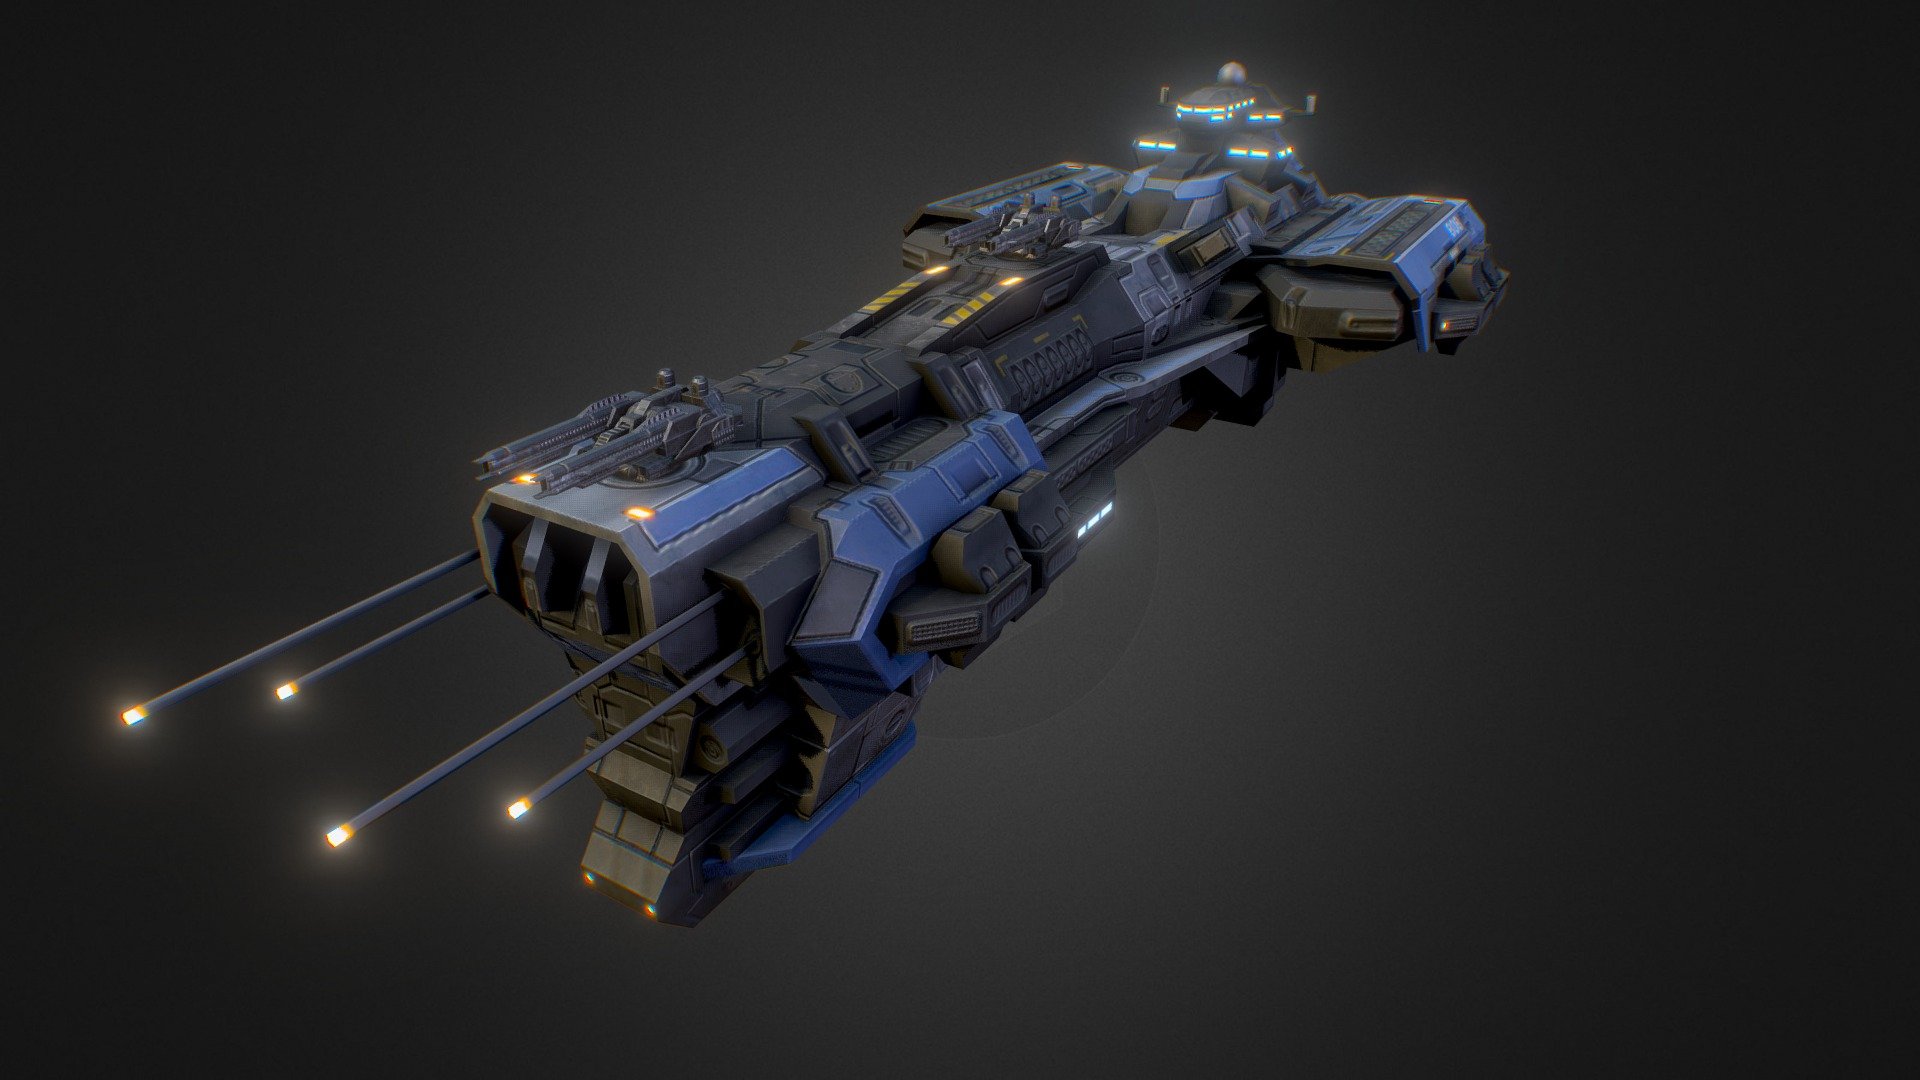 Buy in the Unity Asset Store -link removed- - Battleships "Harbinger" Lowpoly - 3D model by FORGE3D (@forgedwithpassion) 3d model